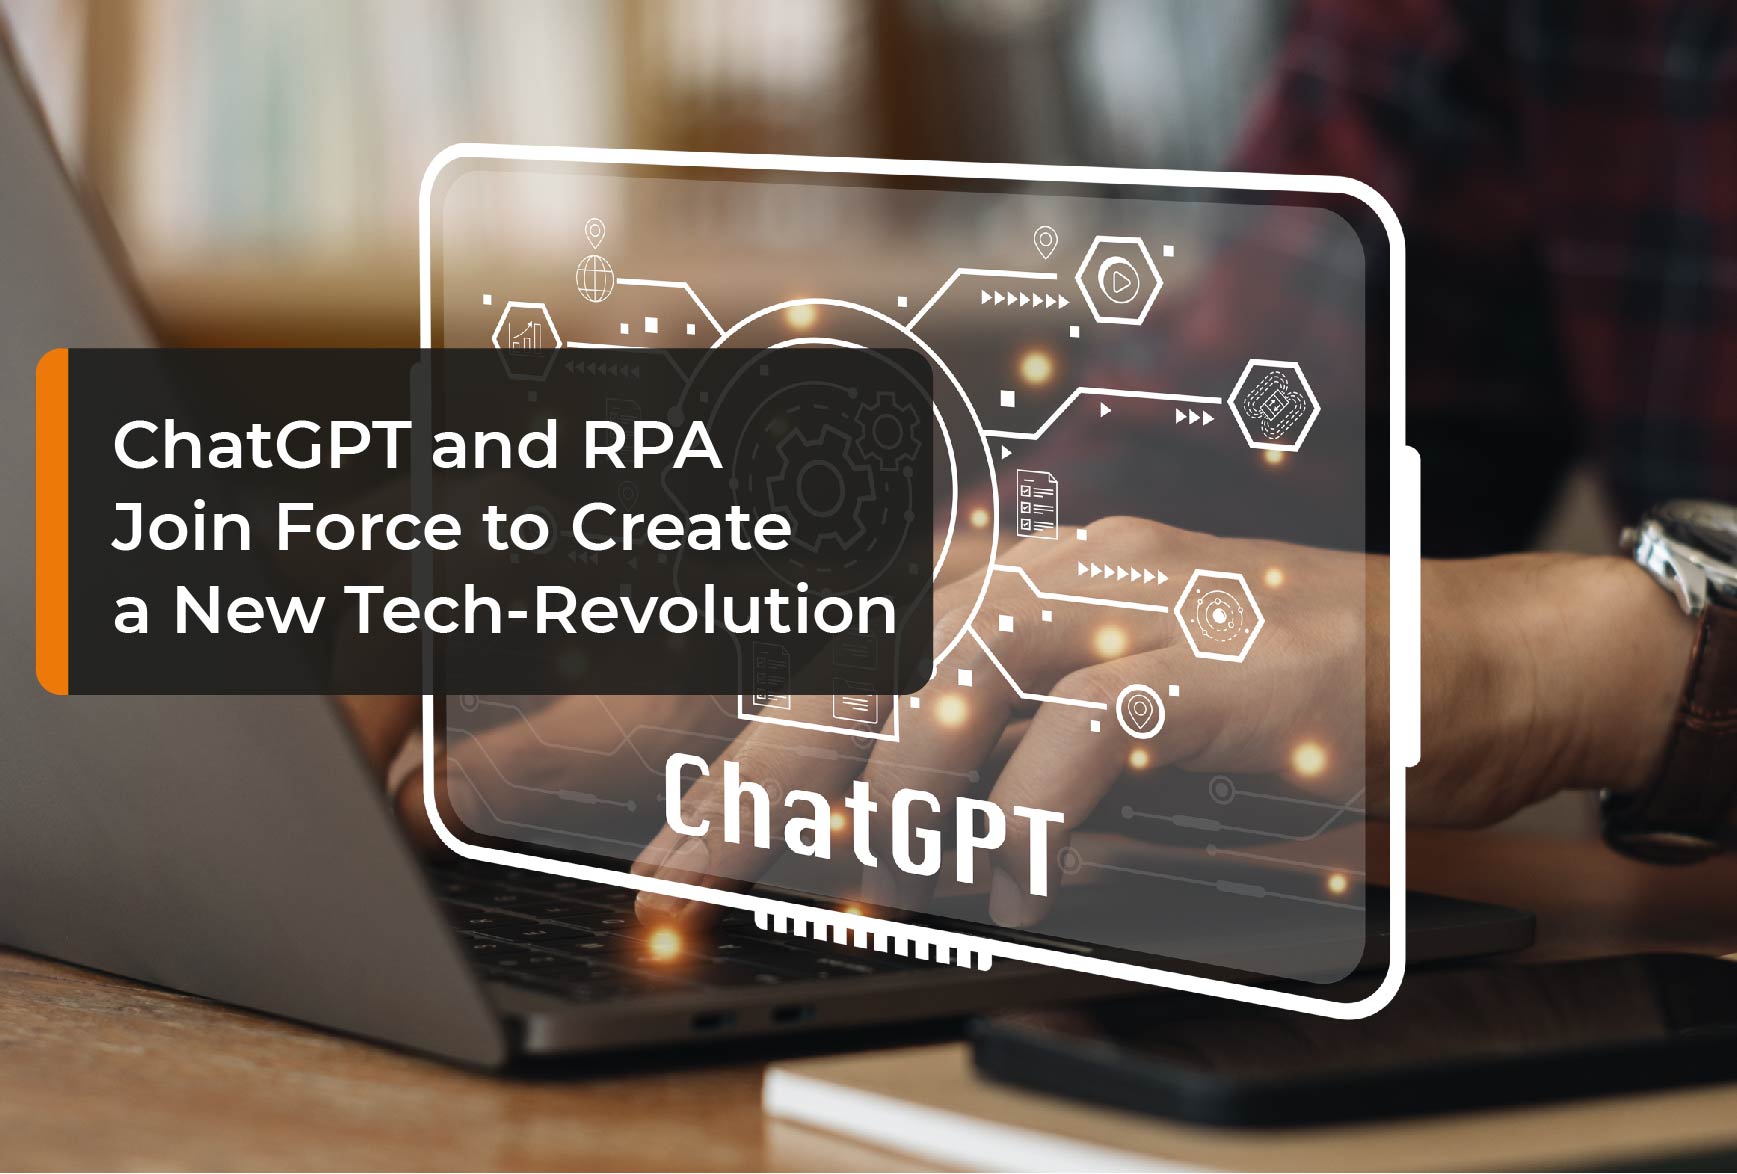 ChatGPT and RPA Join Force to Create a New Tech-Revolution